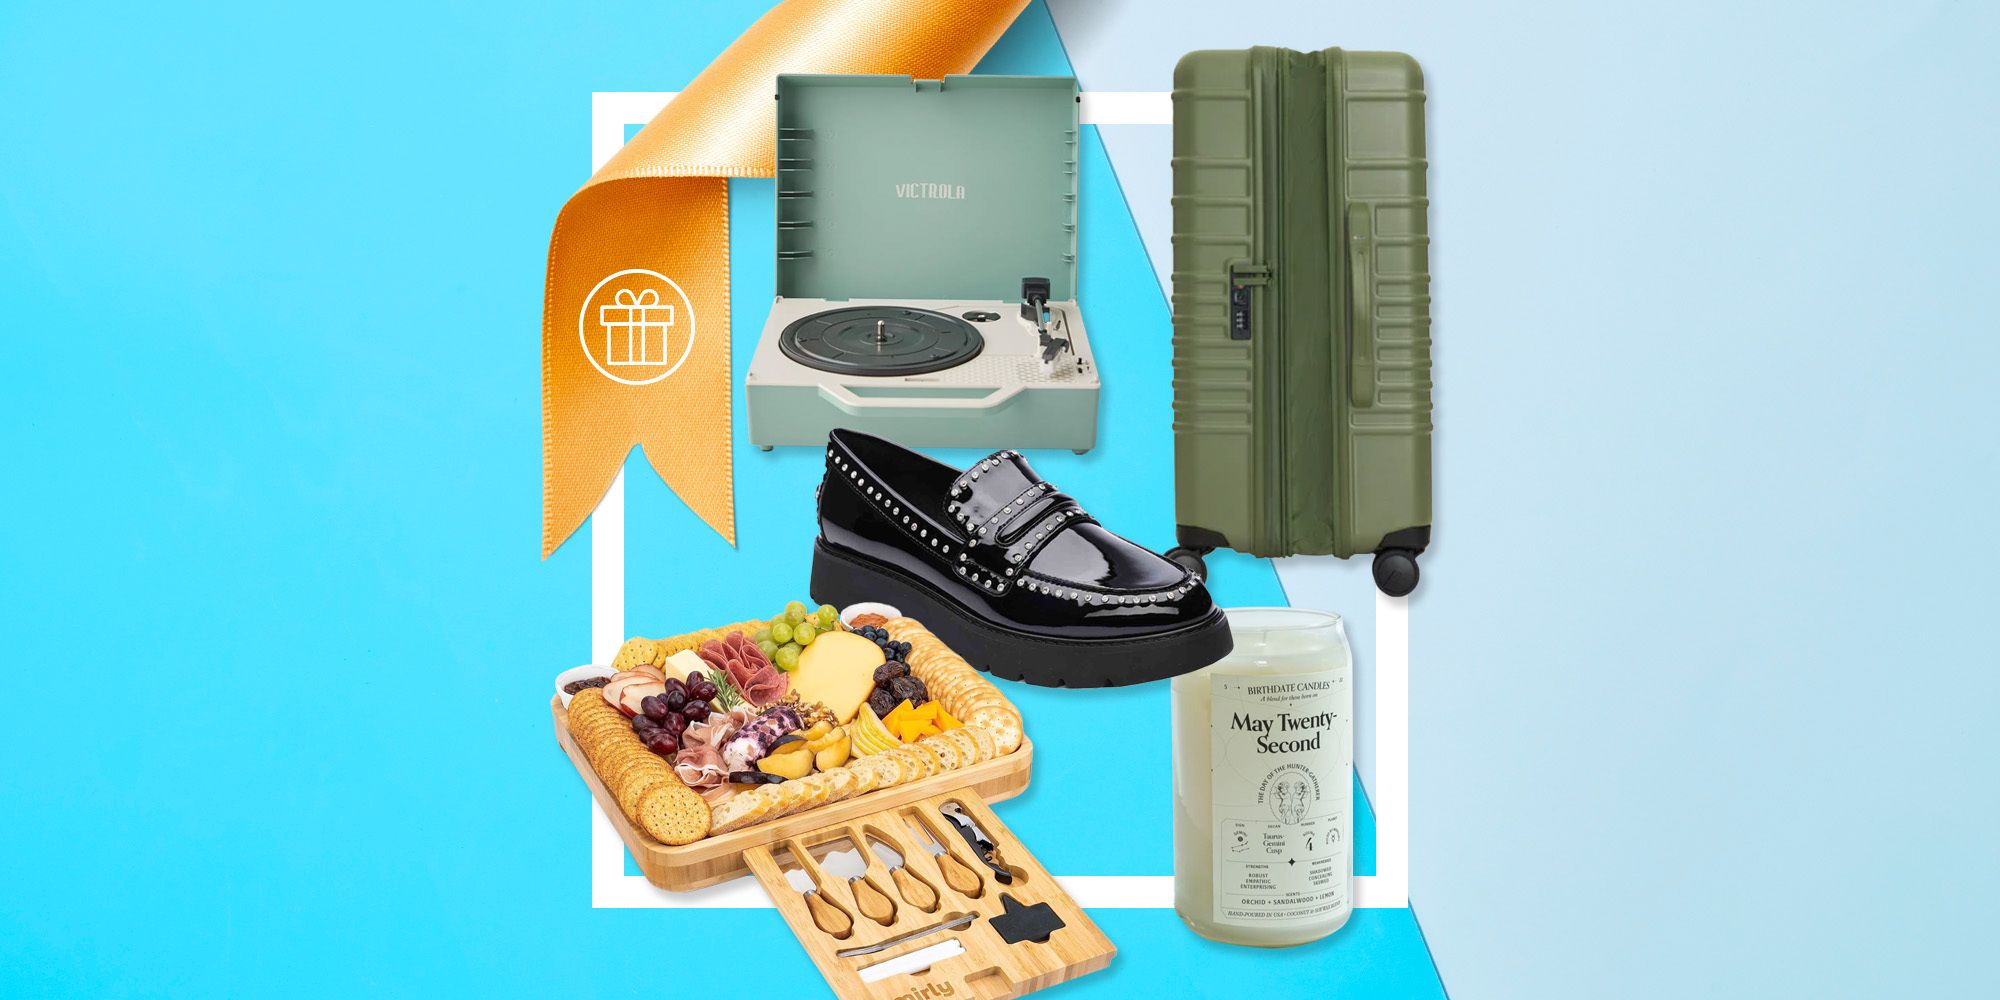 We Asked and These are The 25 Gifts Moms are Actually Asking for in 2023